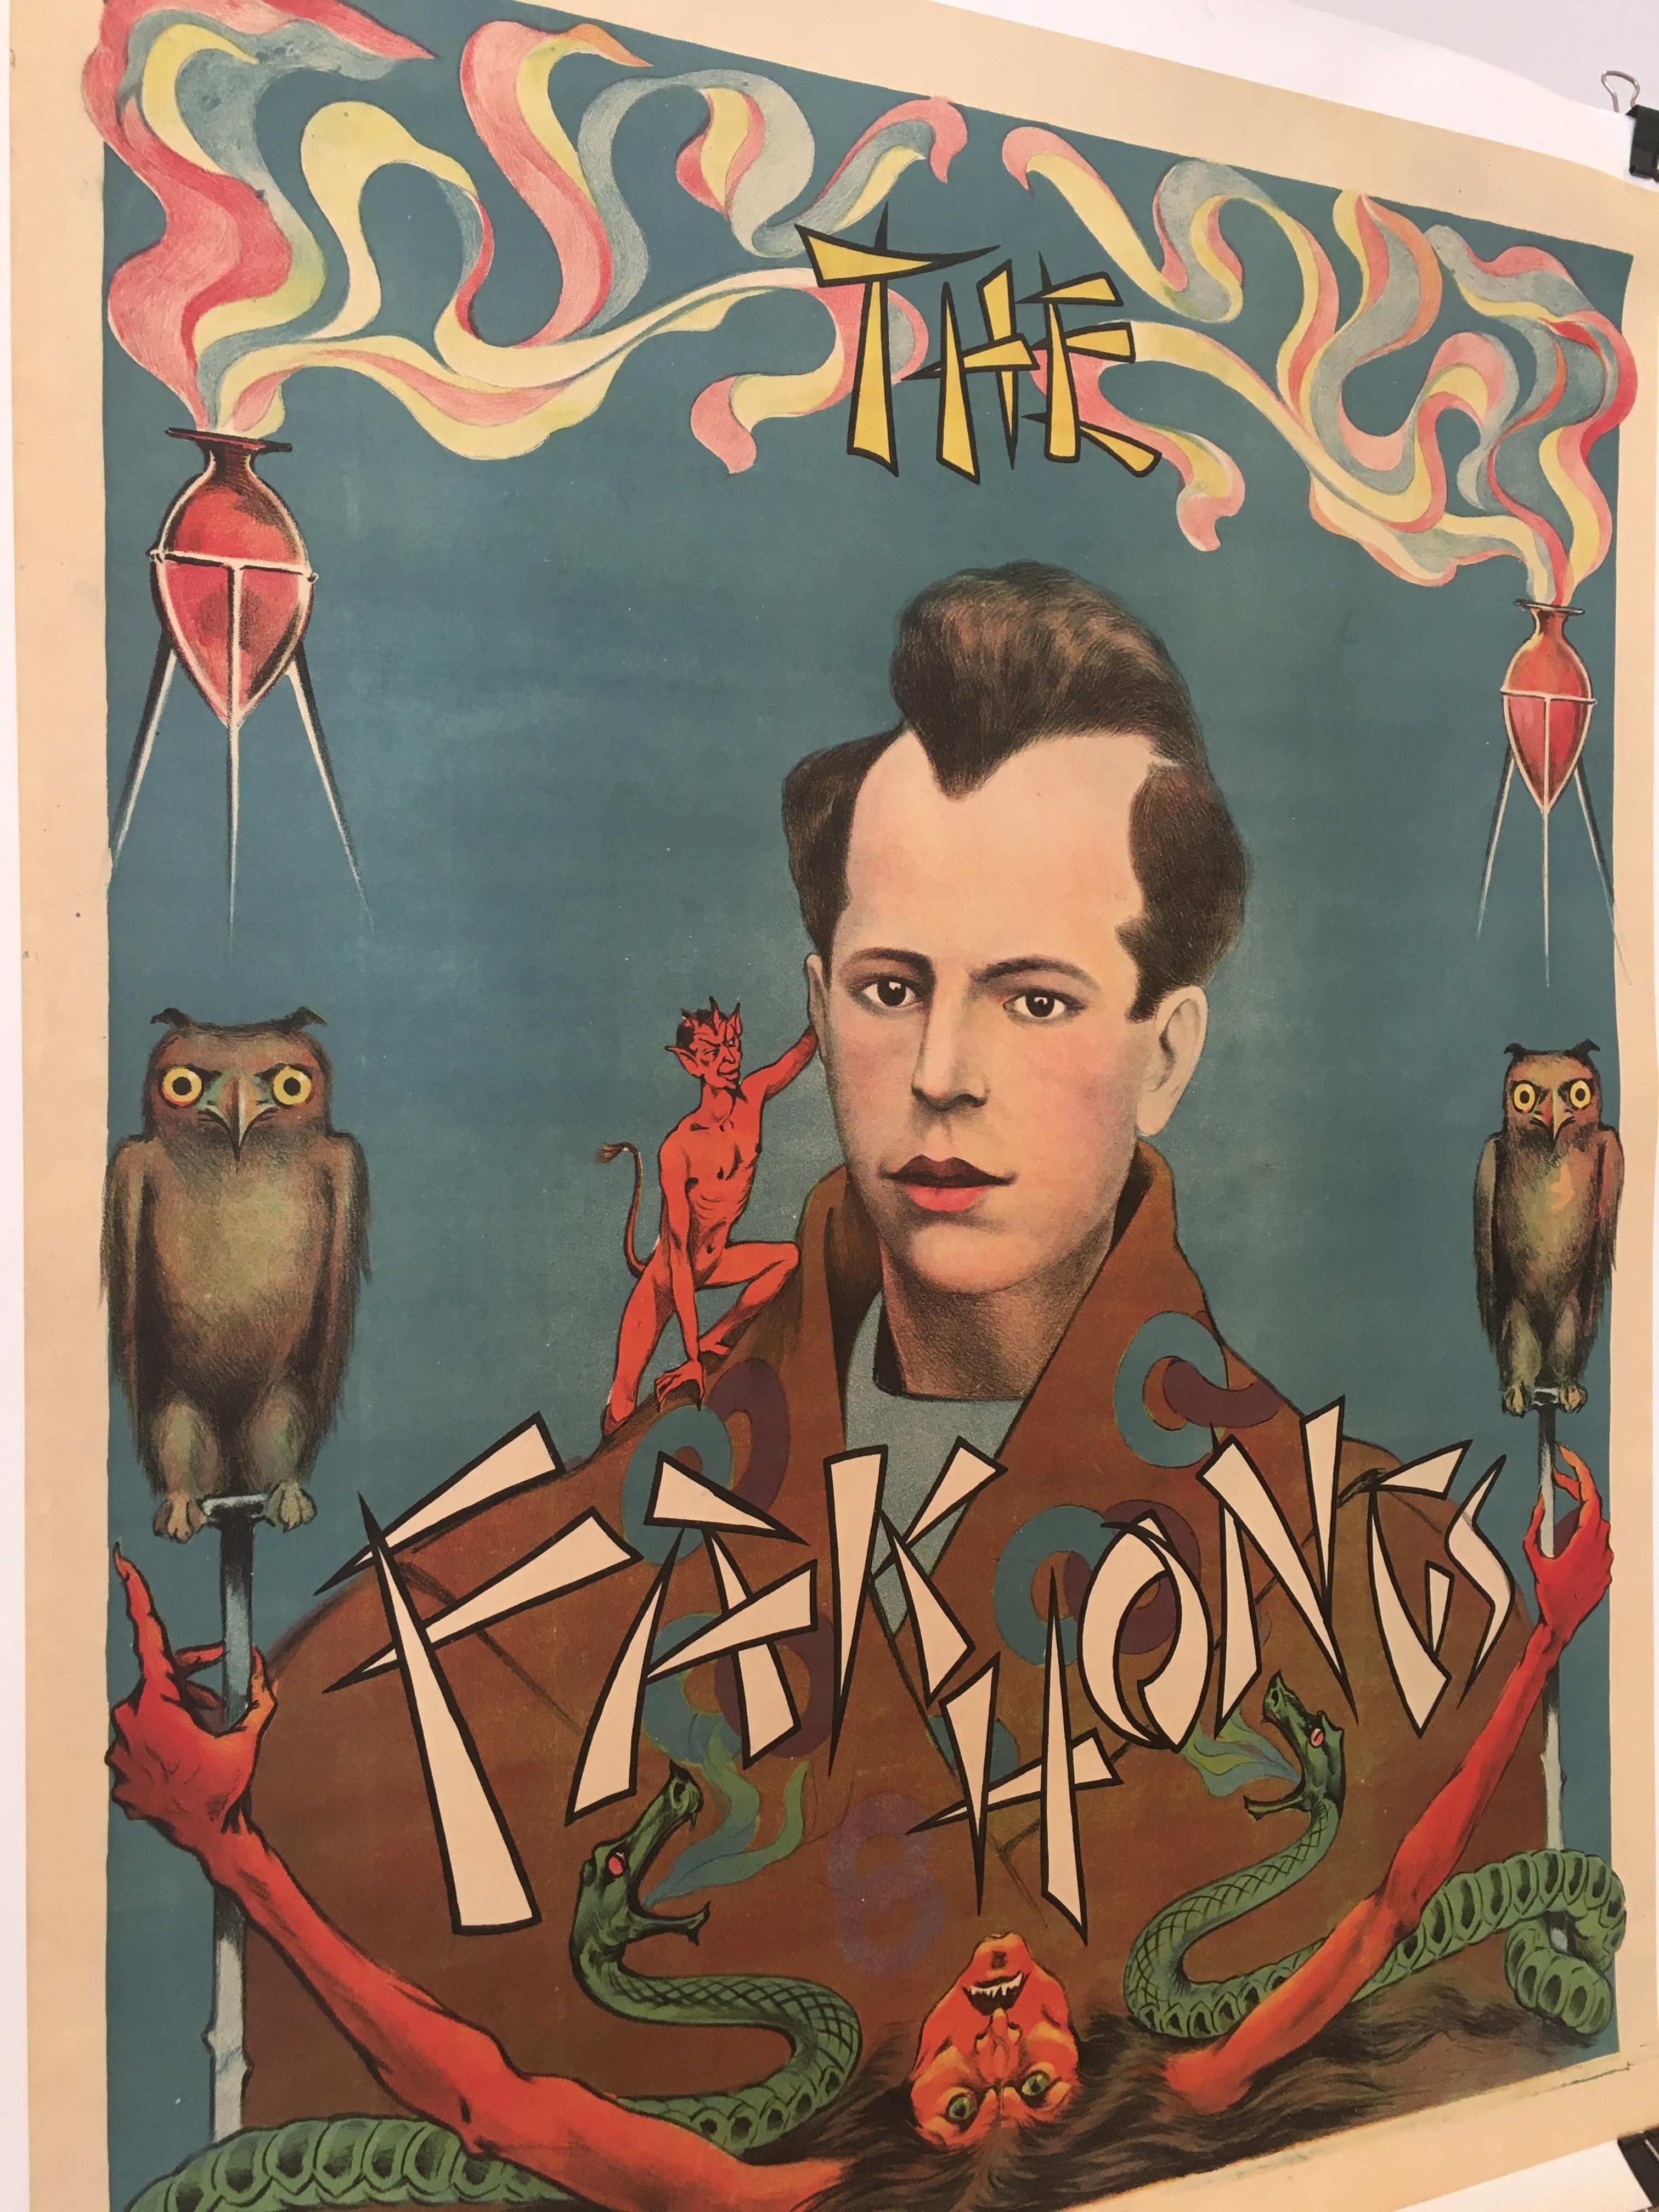 'The Fak Hong' original vintage poster, circa 1920 

This poster is in excellent condition and had been linen backed for preservation.

This is an original poster from the Art Deco period, it is advertising a travelling magic show. This poster